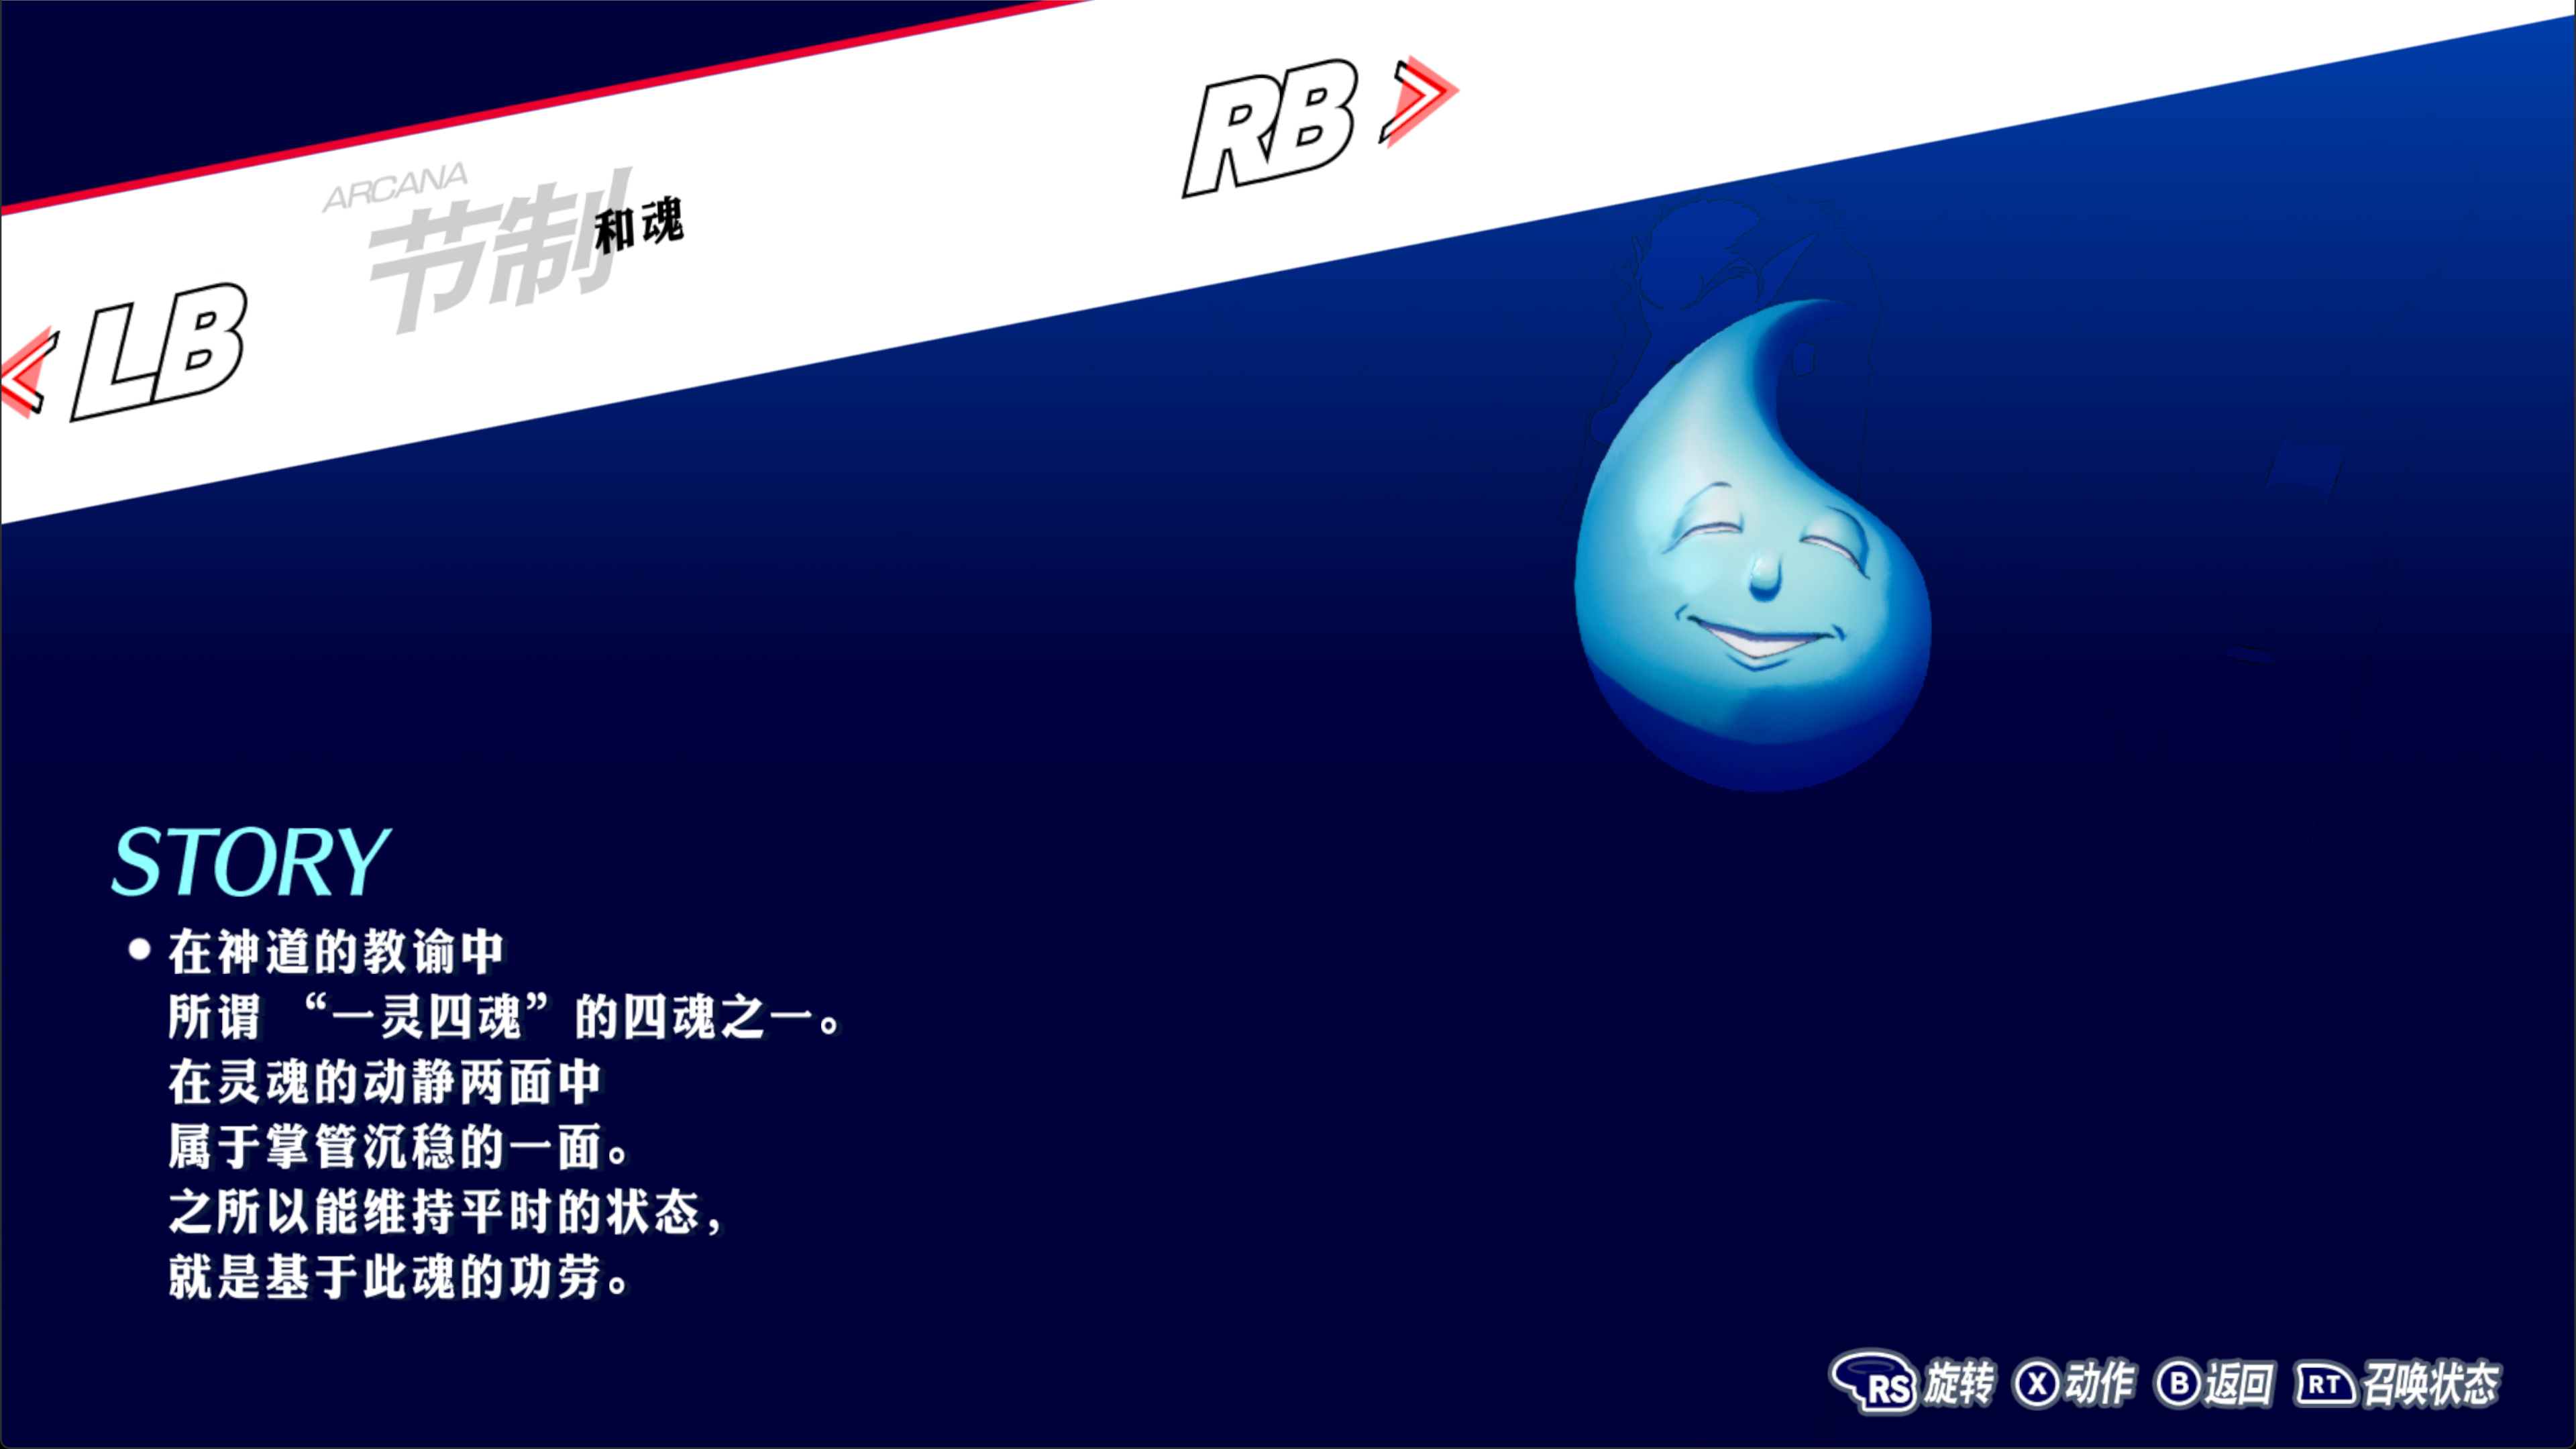 P3R 和魂图鉴.png